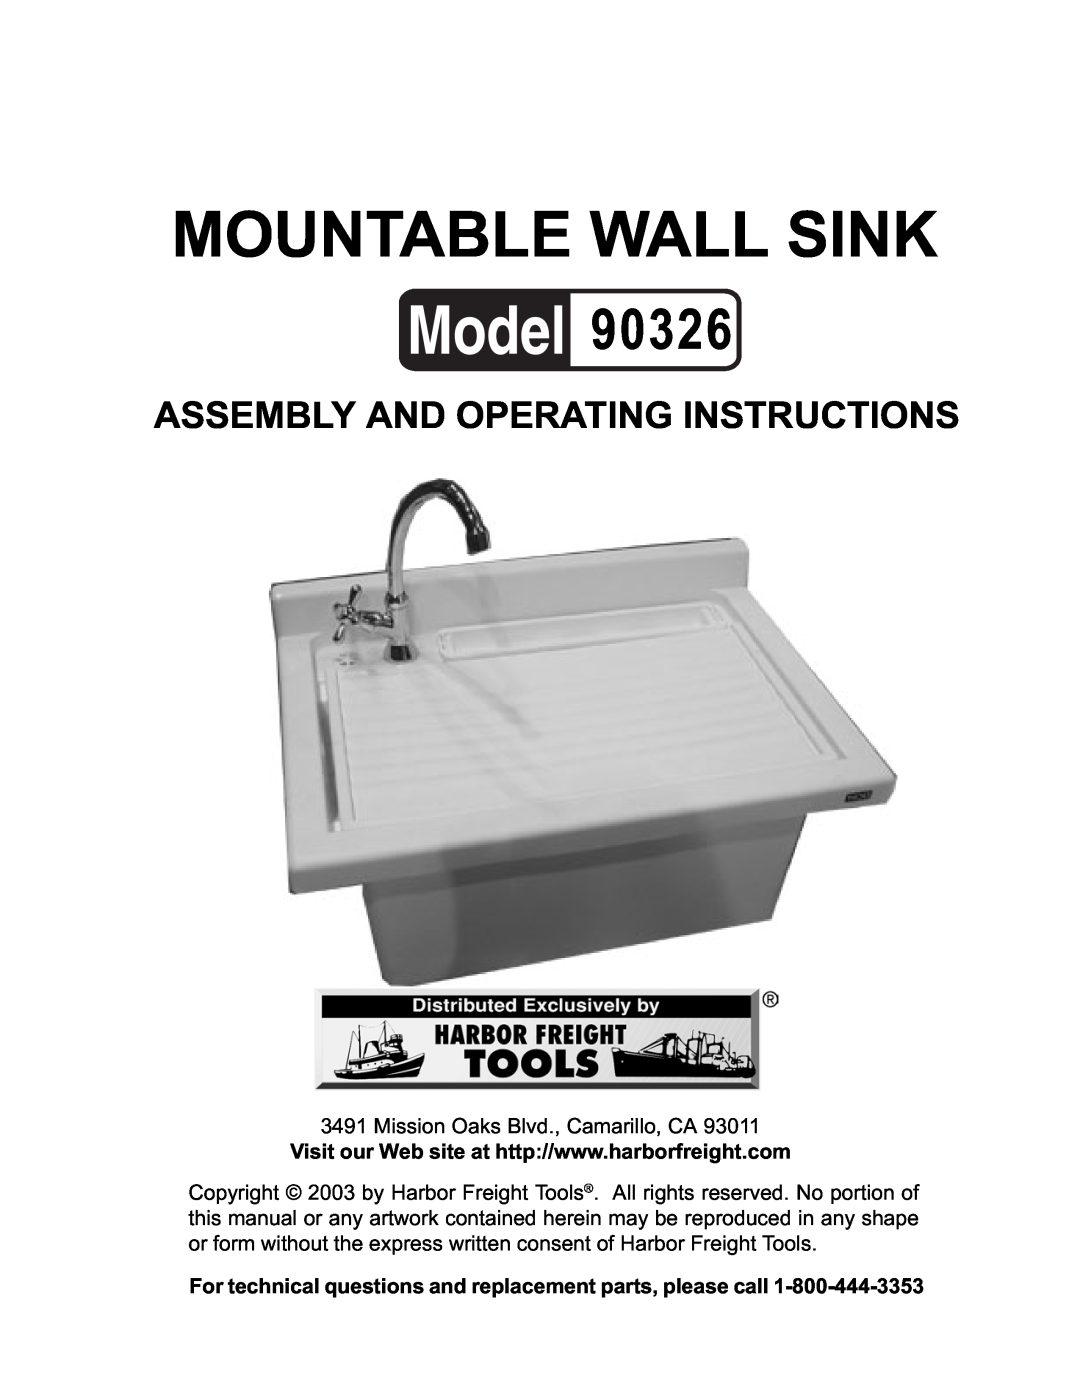 Harbor Freight Tools 90326 operating instructions Mountable Wall Sink, Assembly And Operating Instructions 